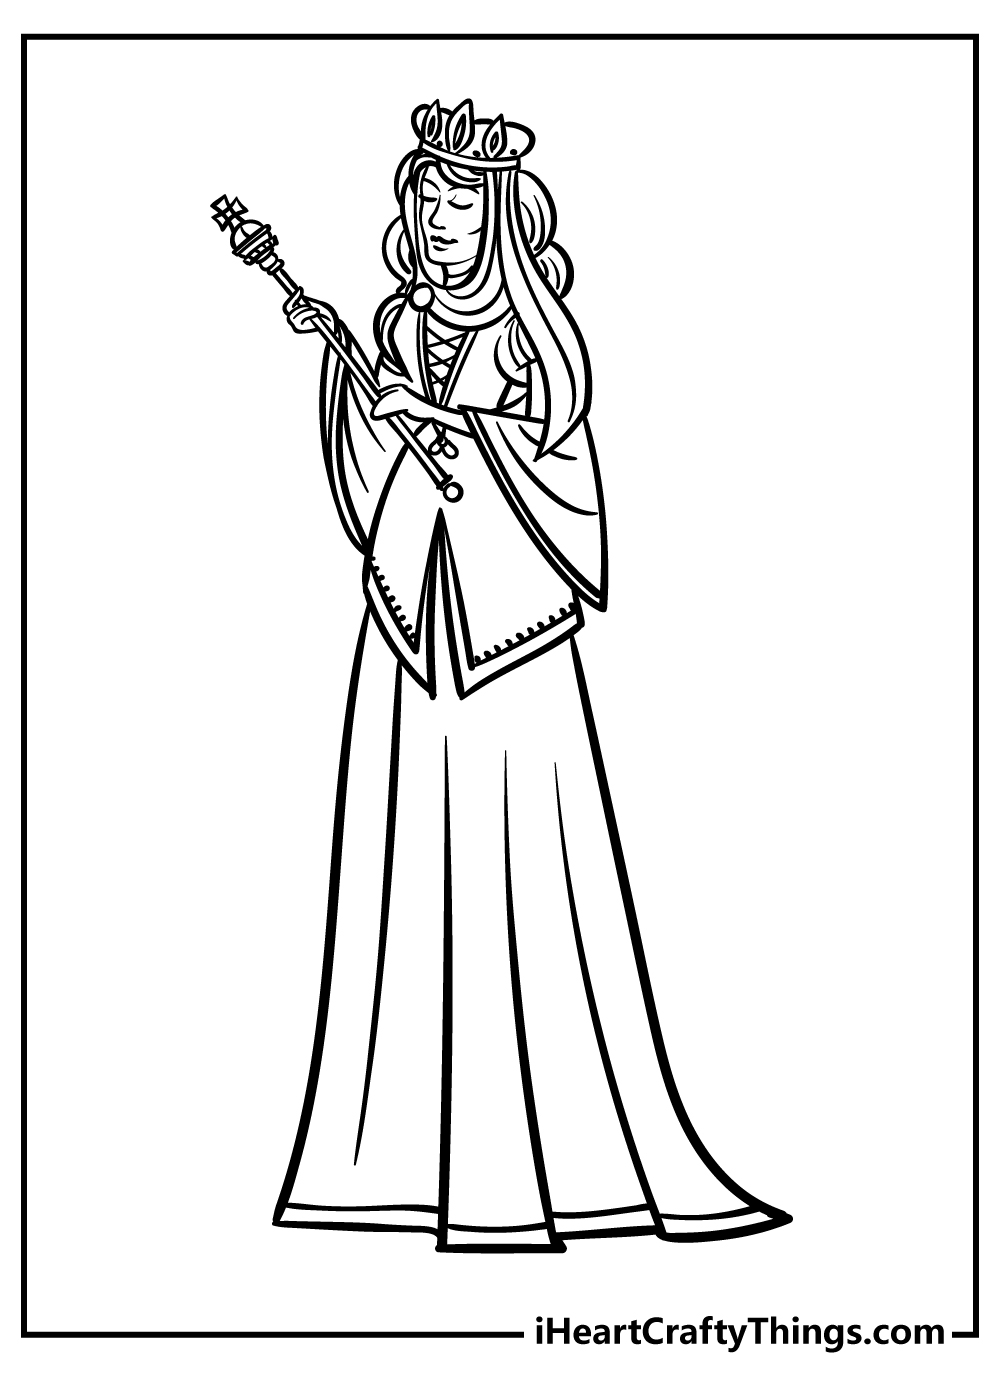 Printable Queen Coloring Pages Updated 20